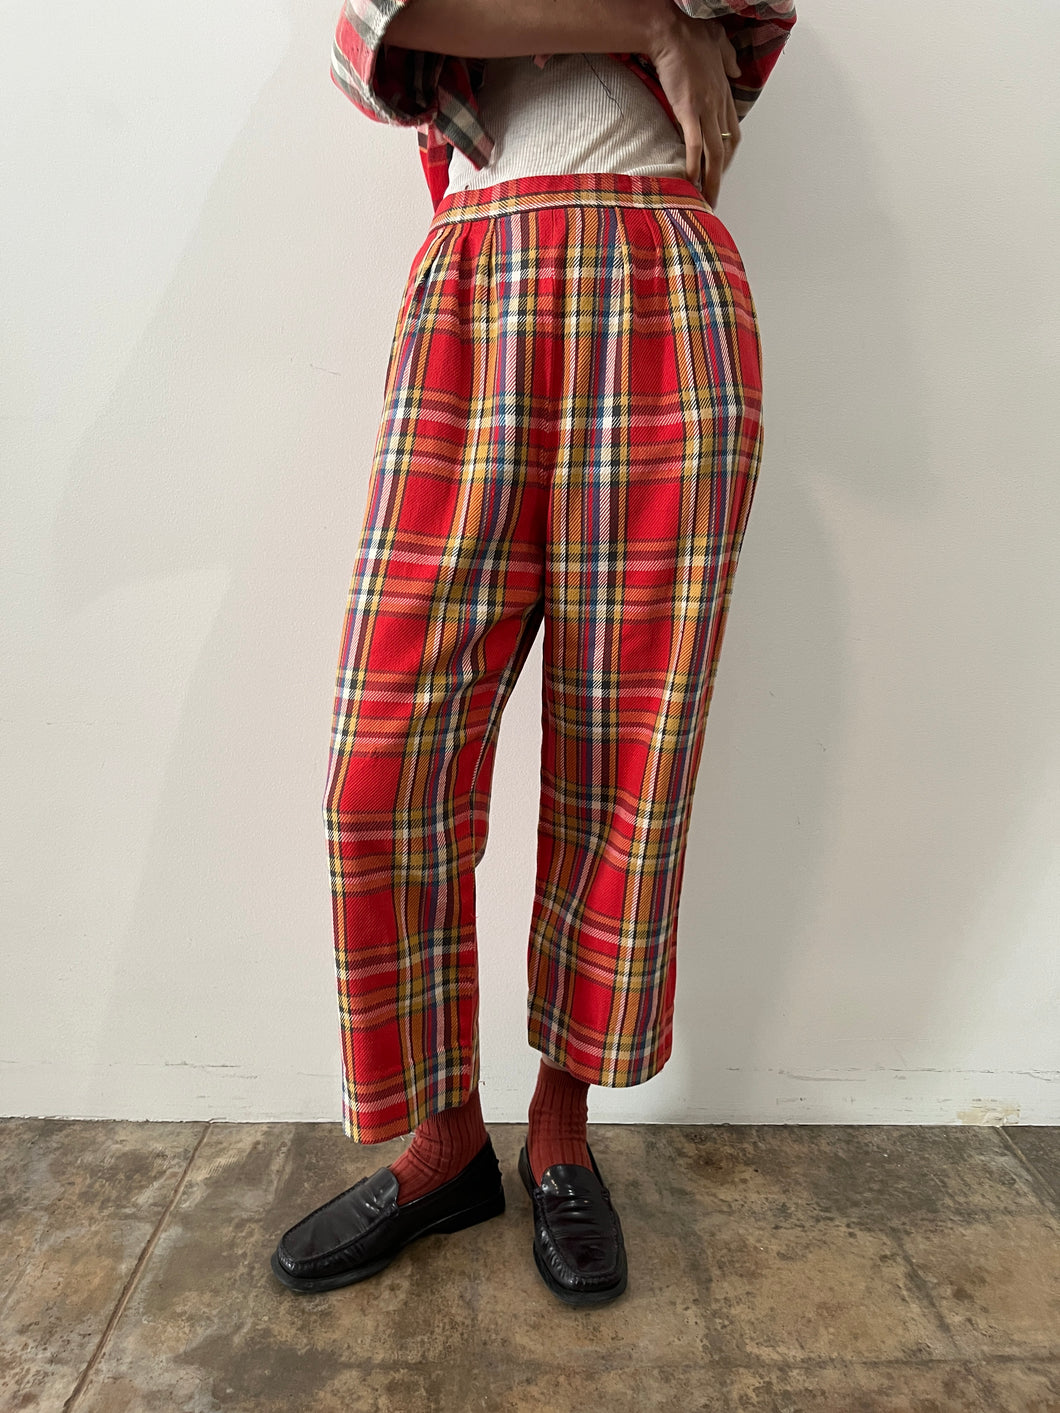 70s/80s Cotton Flannel Homemade Trousers